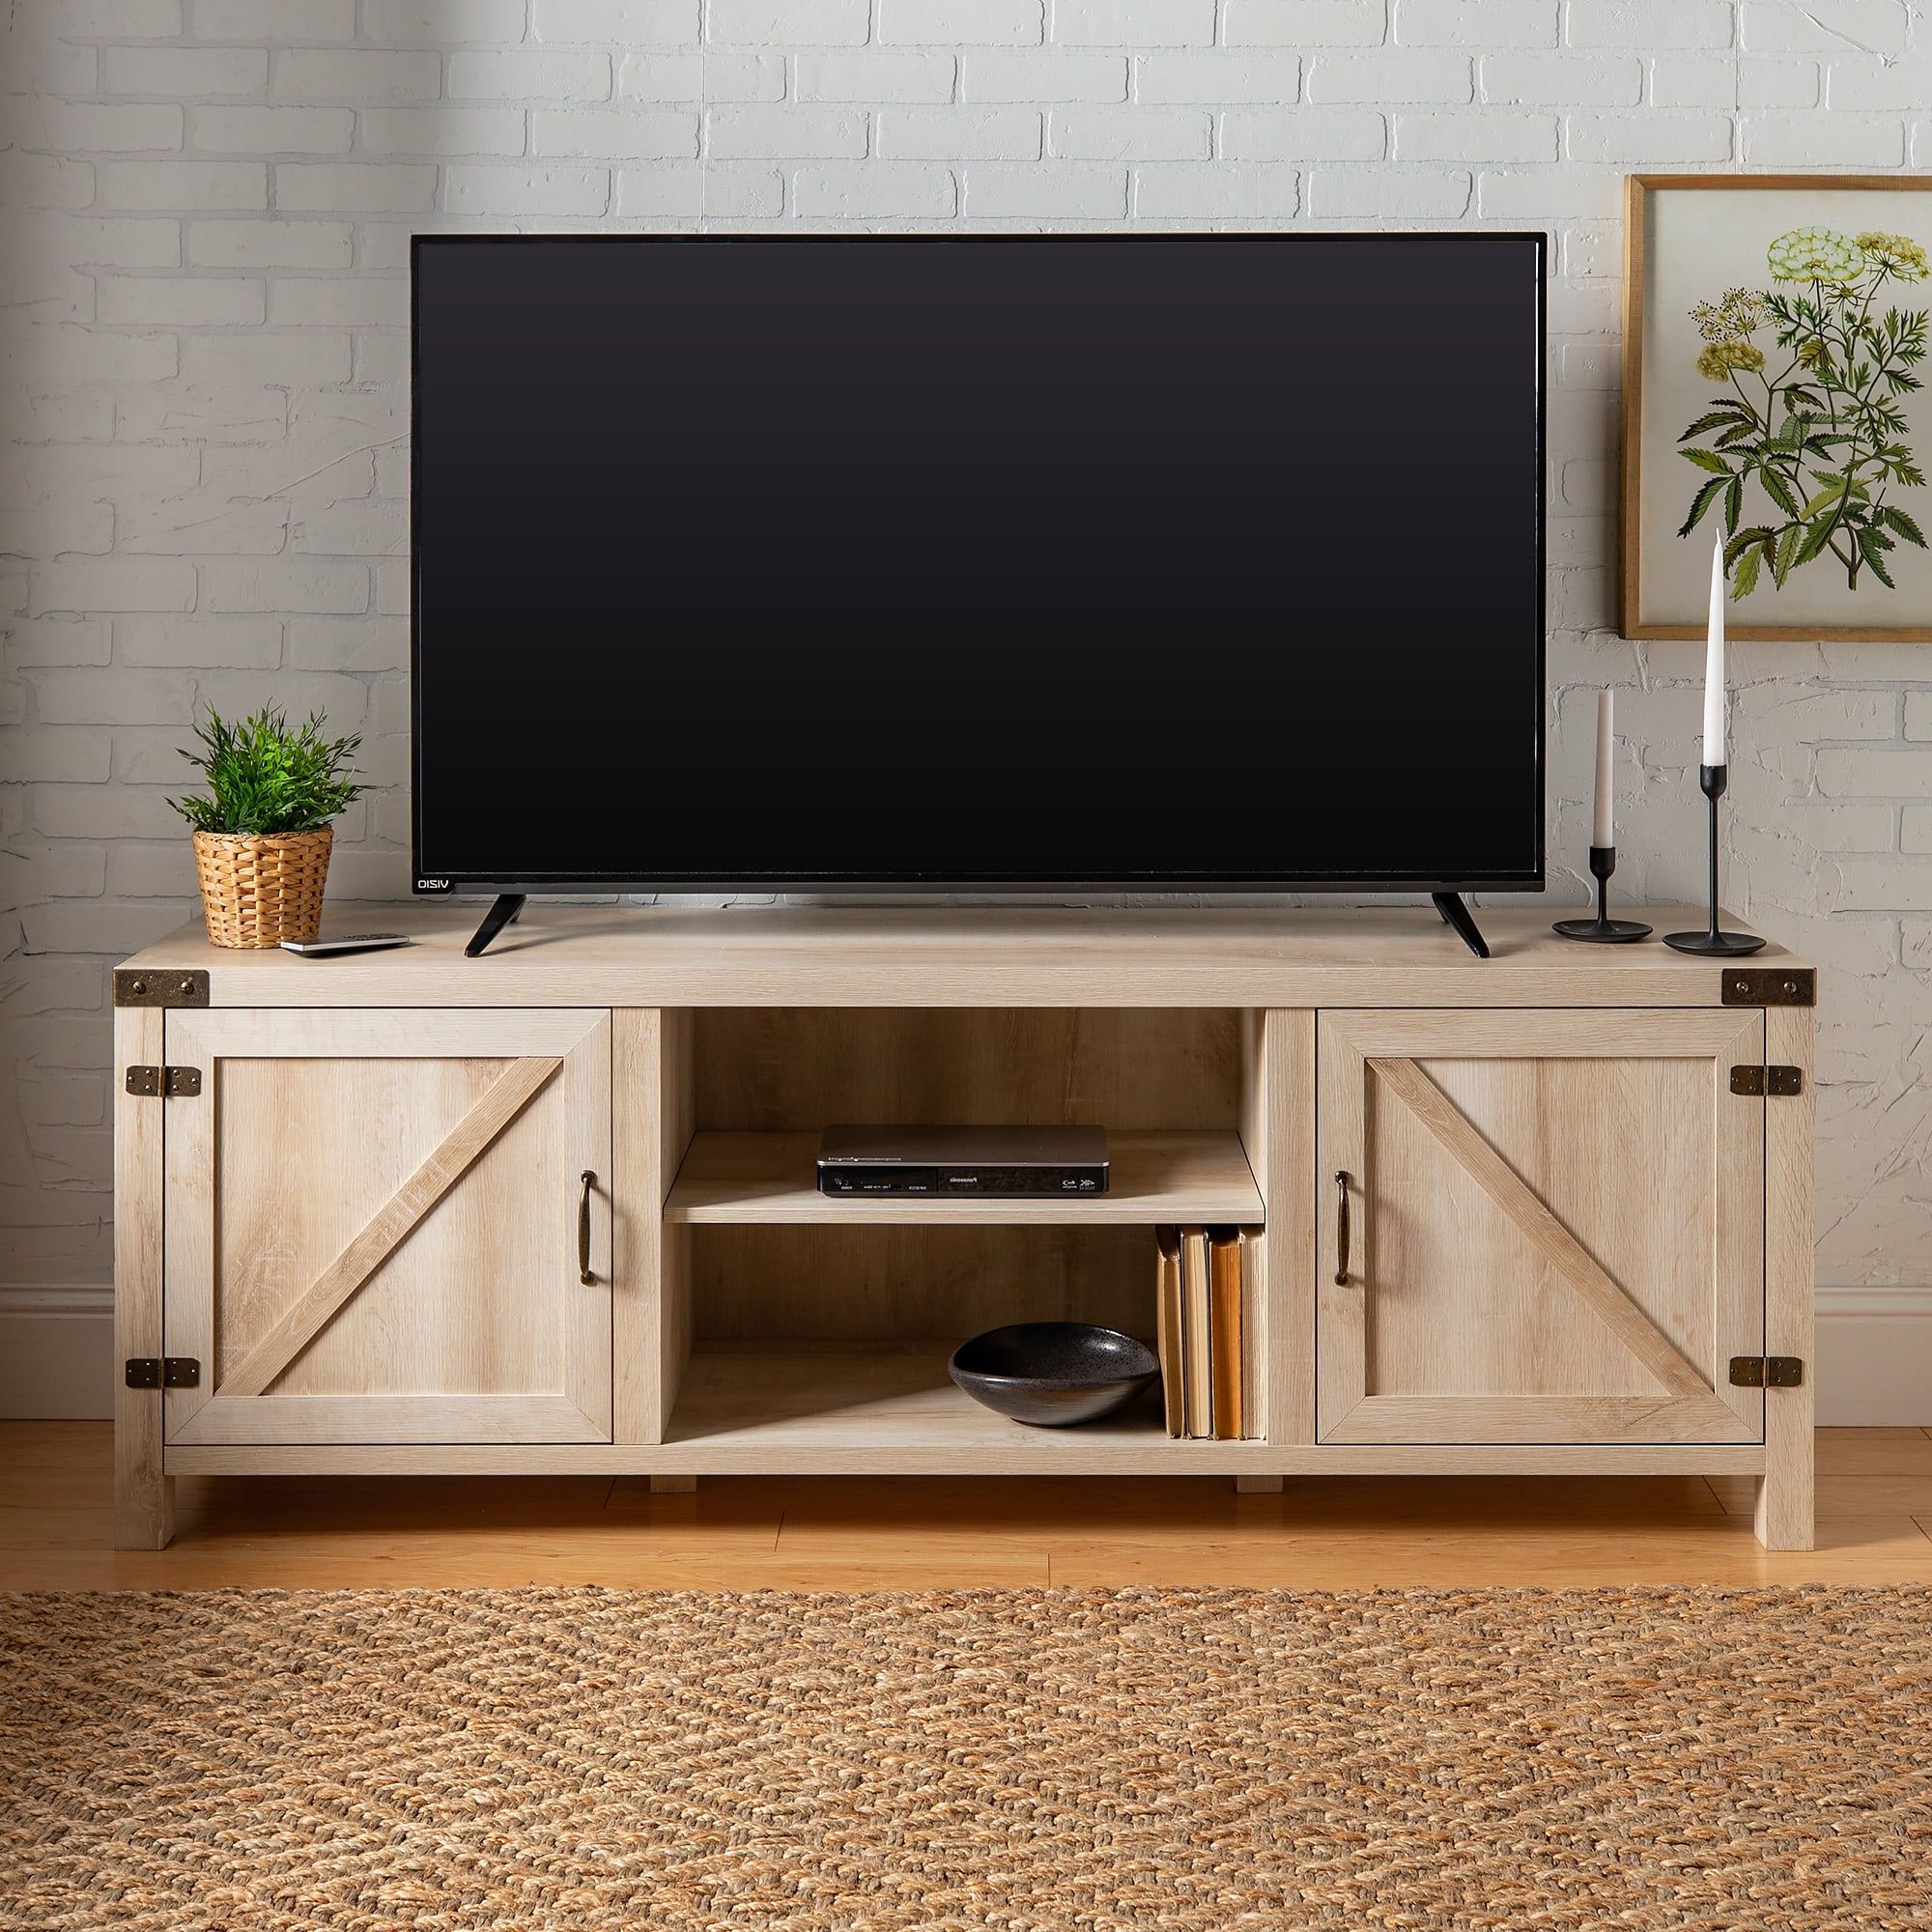 Farmhouse Tv Stands For Most Popular Woven Paths Farmhouse Barn Door Tv Stand For Tvs Up To 80", White Oak (View 2 of 15)